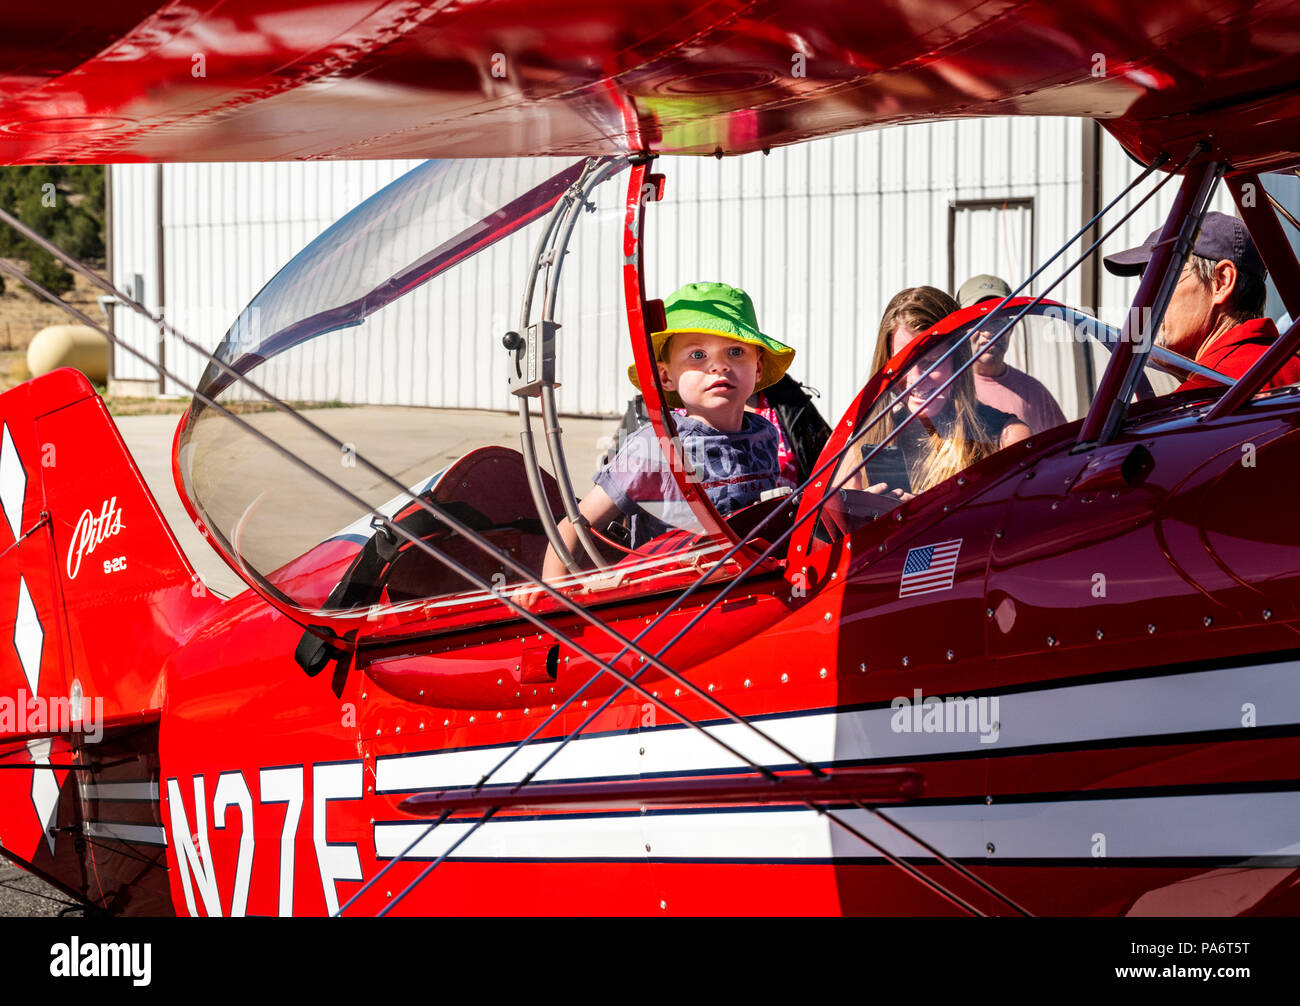 Junge Inspektion Pitts Special S2C Doppeldecker; Salida Fly-in & Air Show; Salida, Colorado, USA Stockfoto